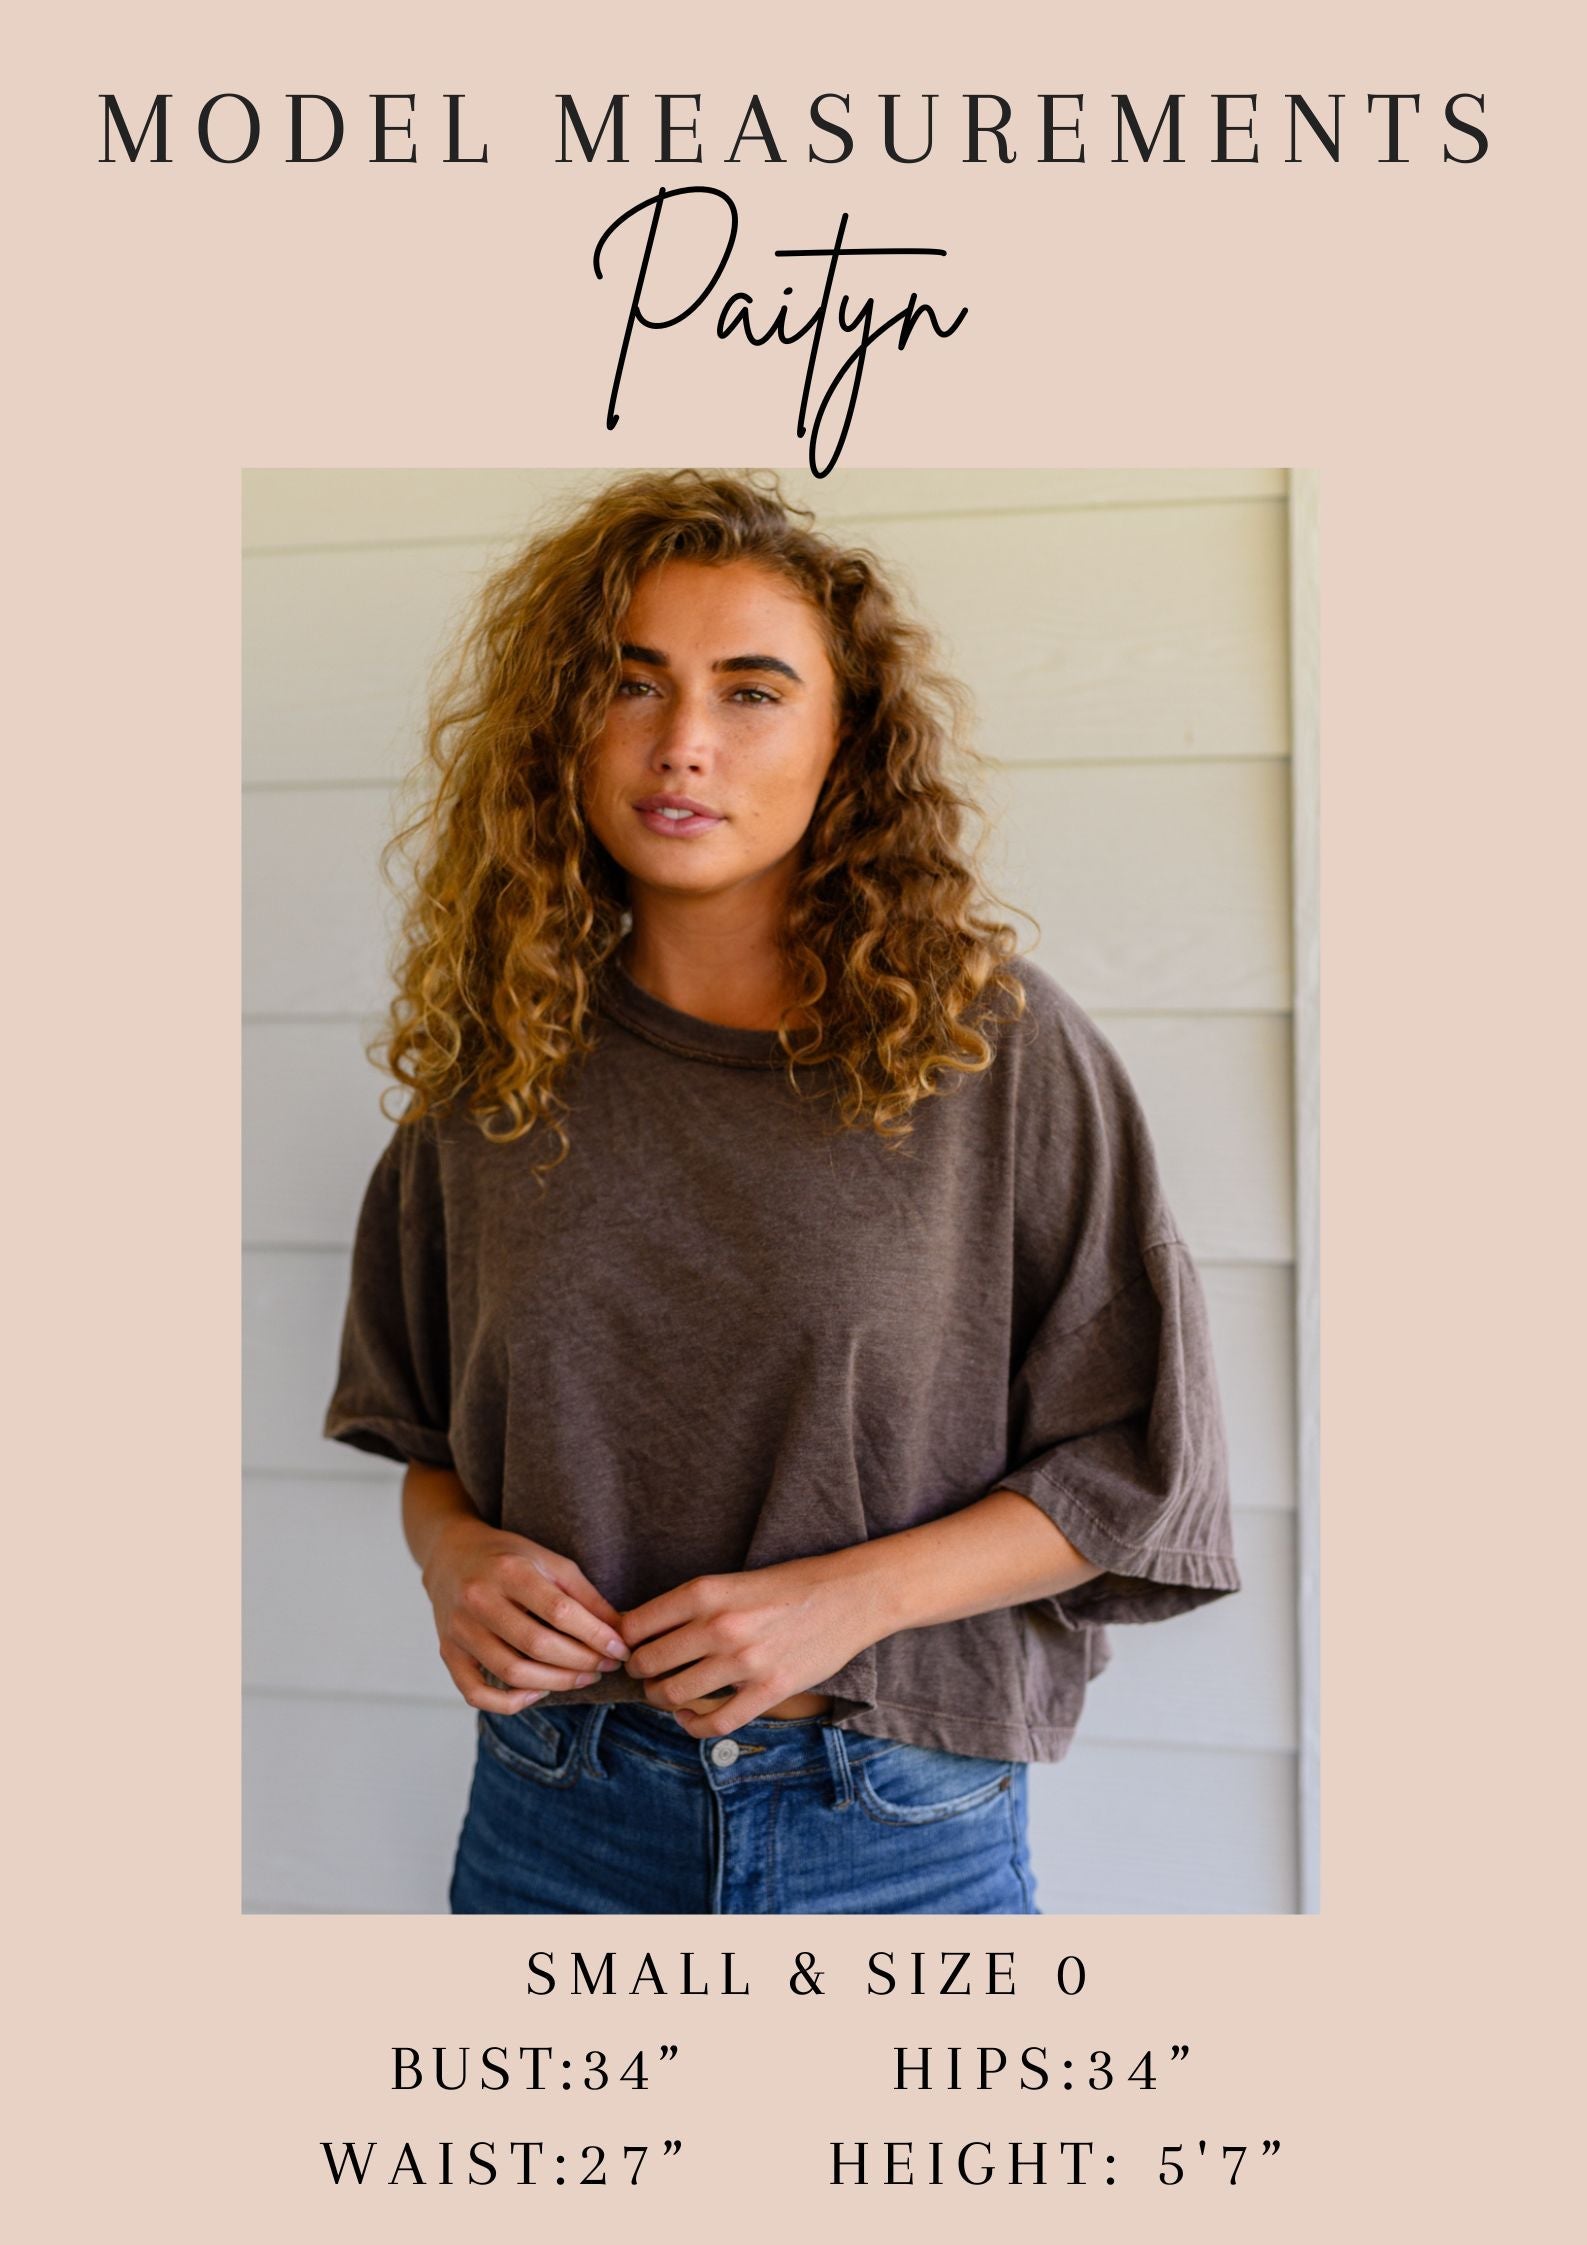 Load image into Gallery viewer, Casually Boho Keyhole Neckline Top